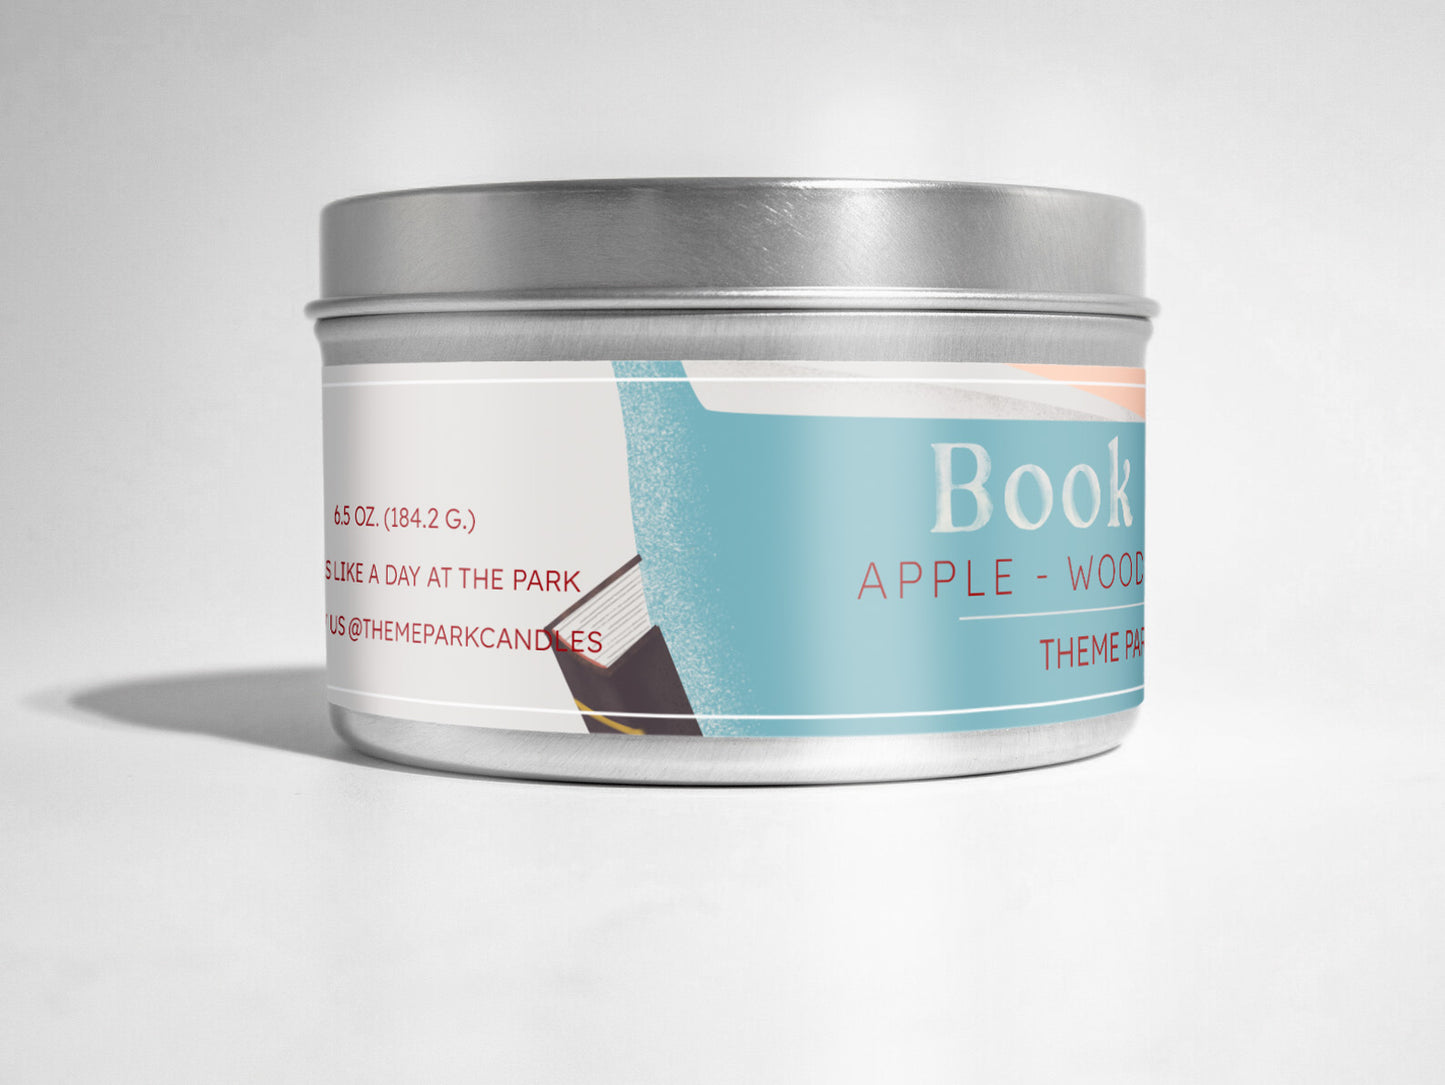 Book Smart Candle